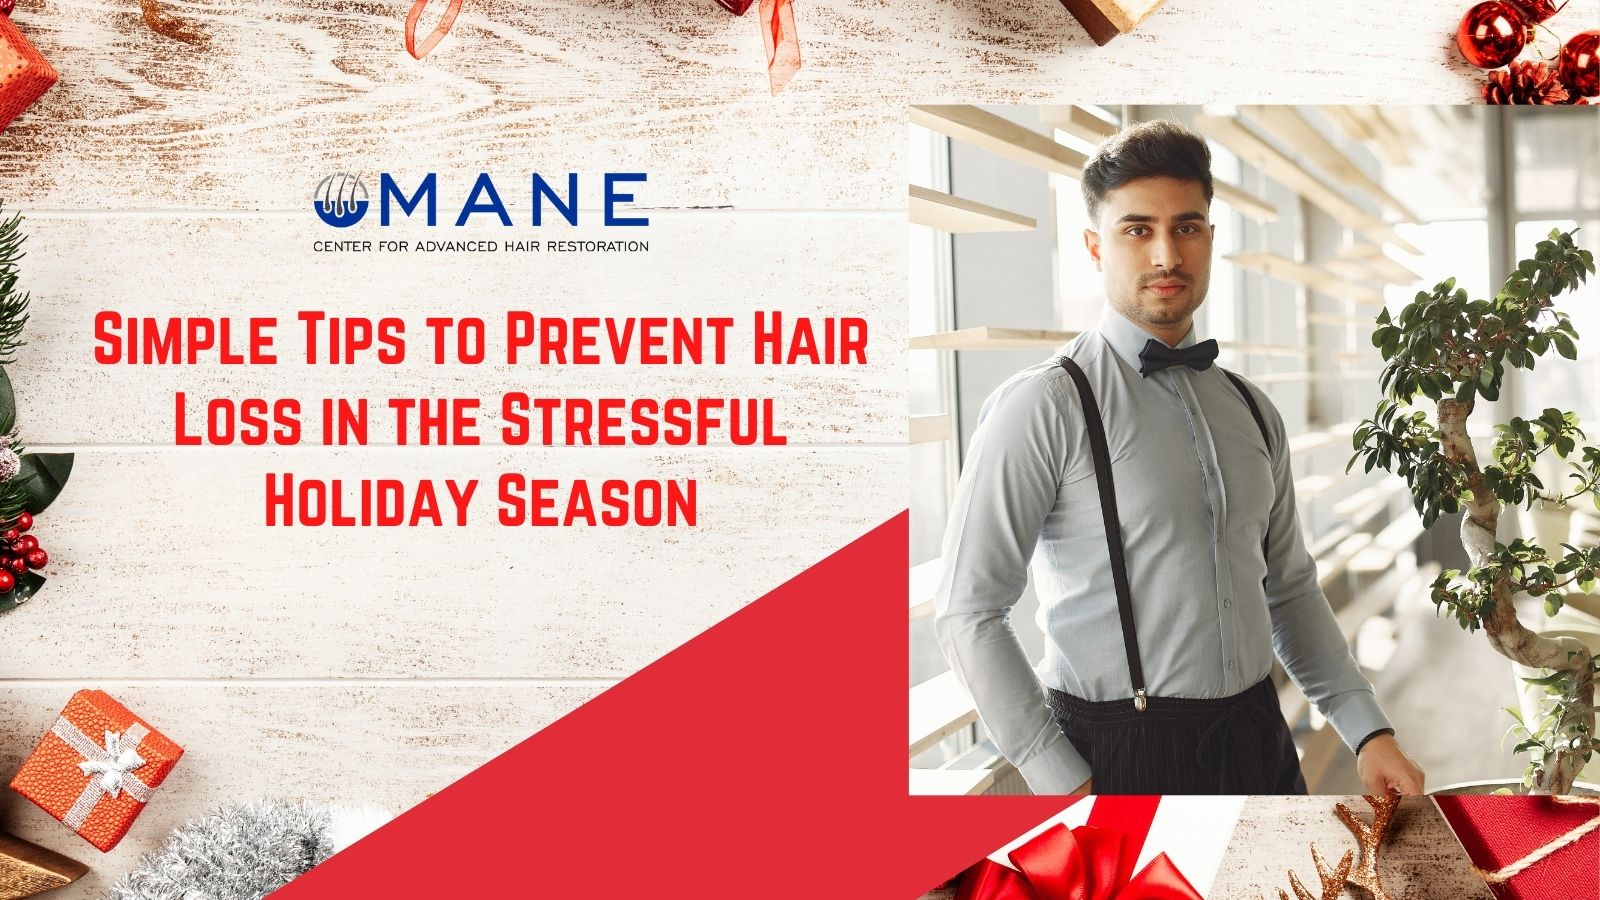 Simple Tips to Prevent Hair Loss in the Stressful Holiday Season